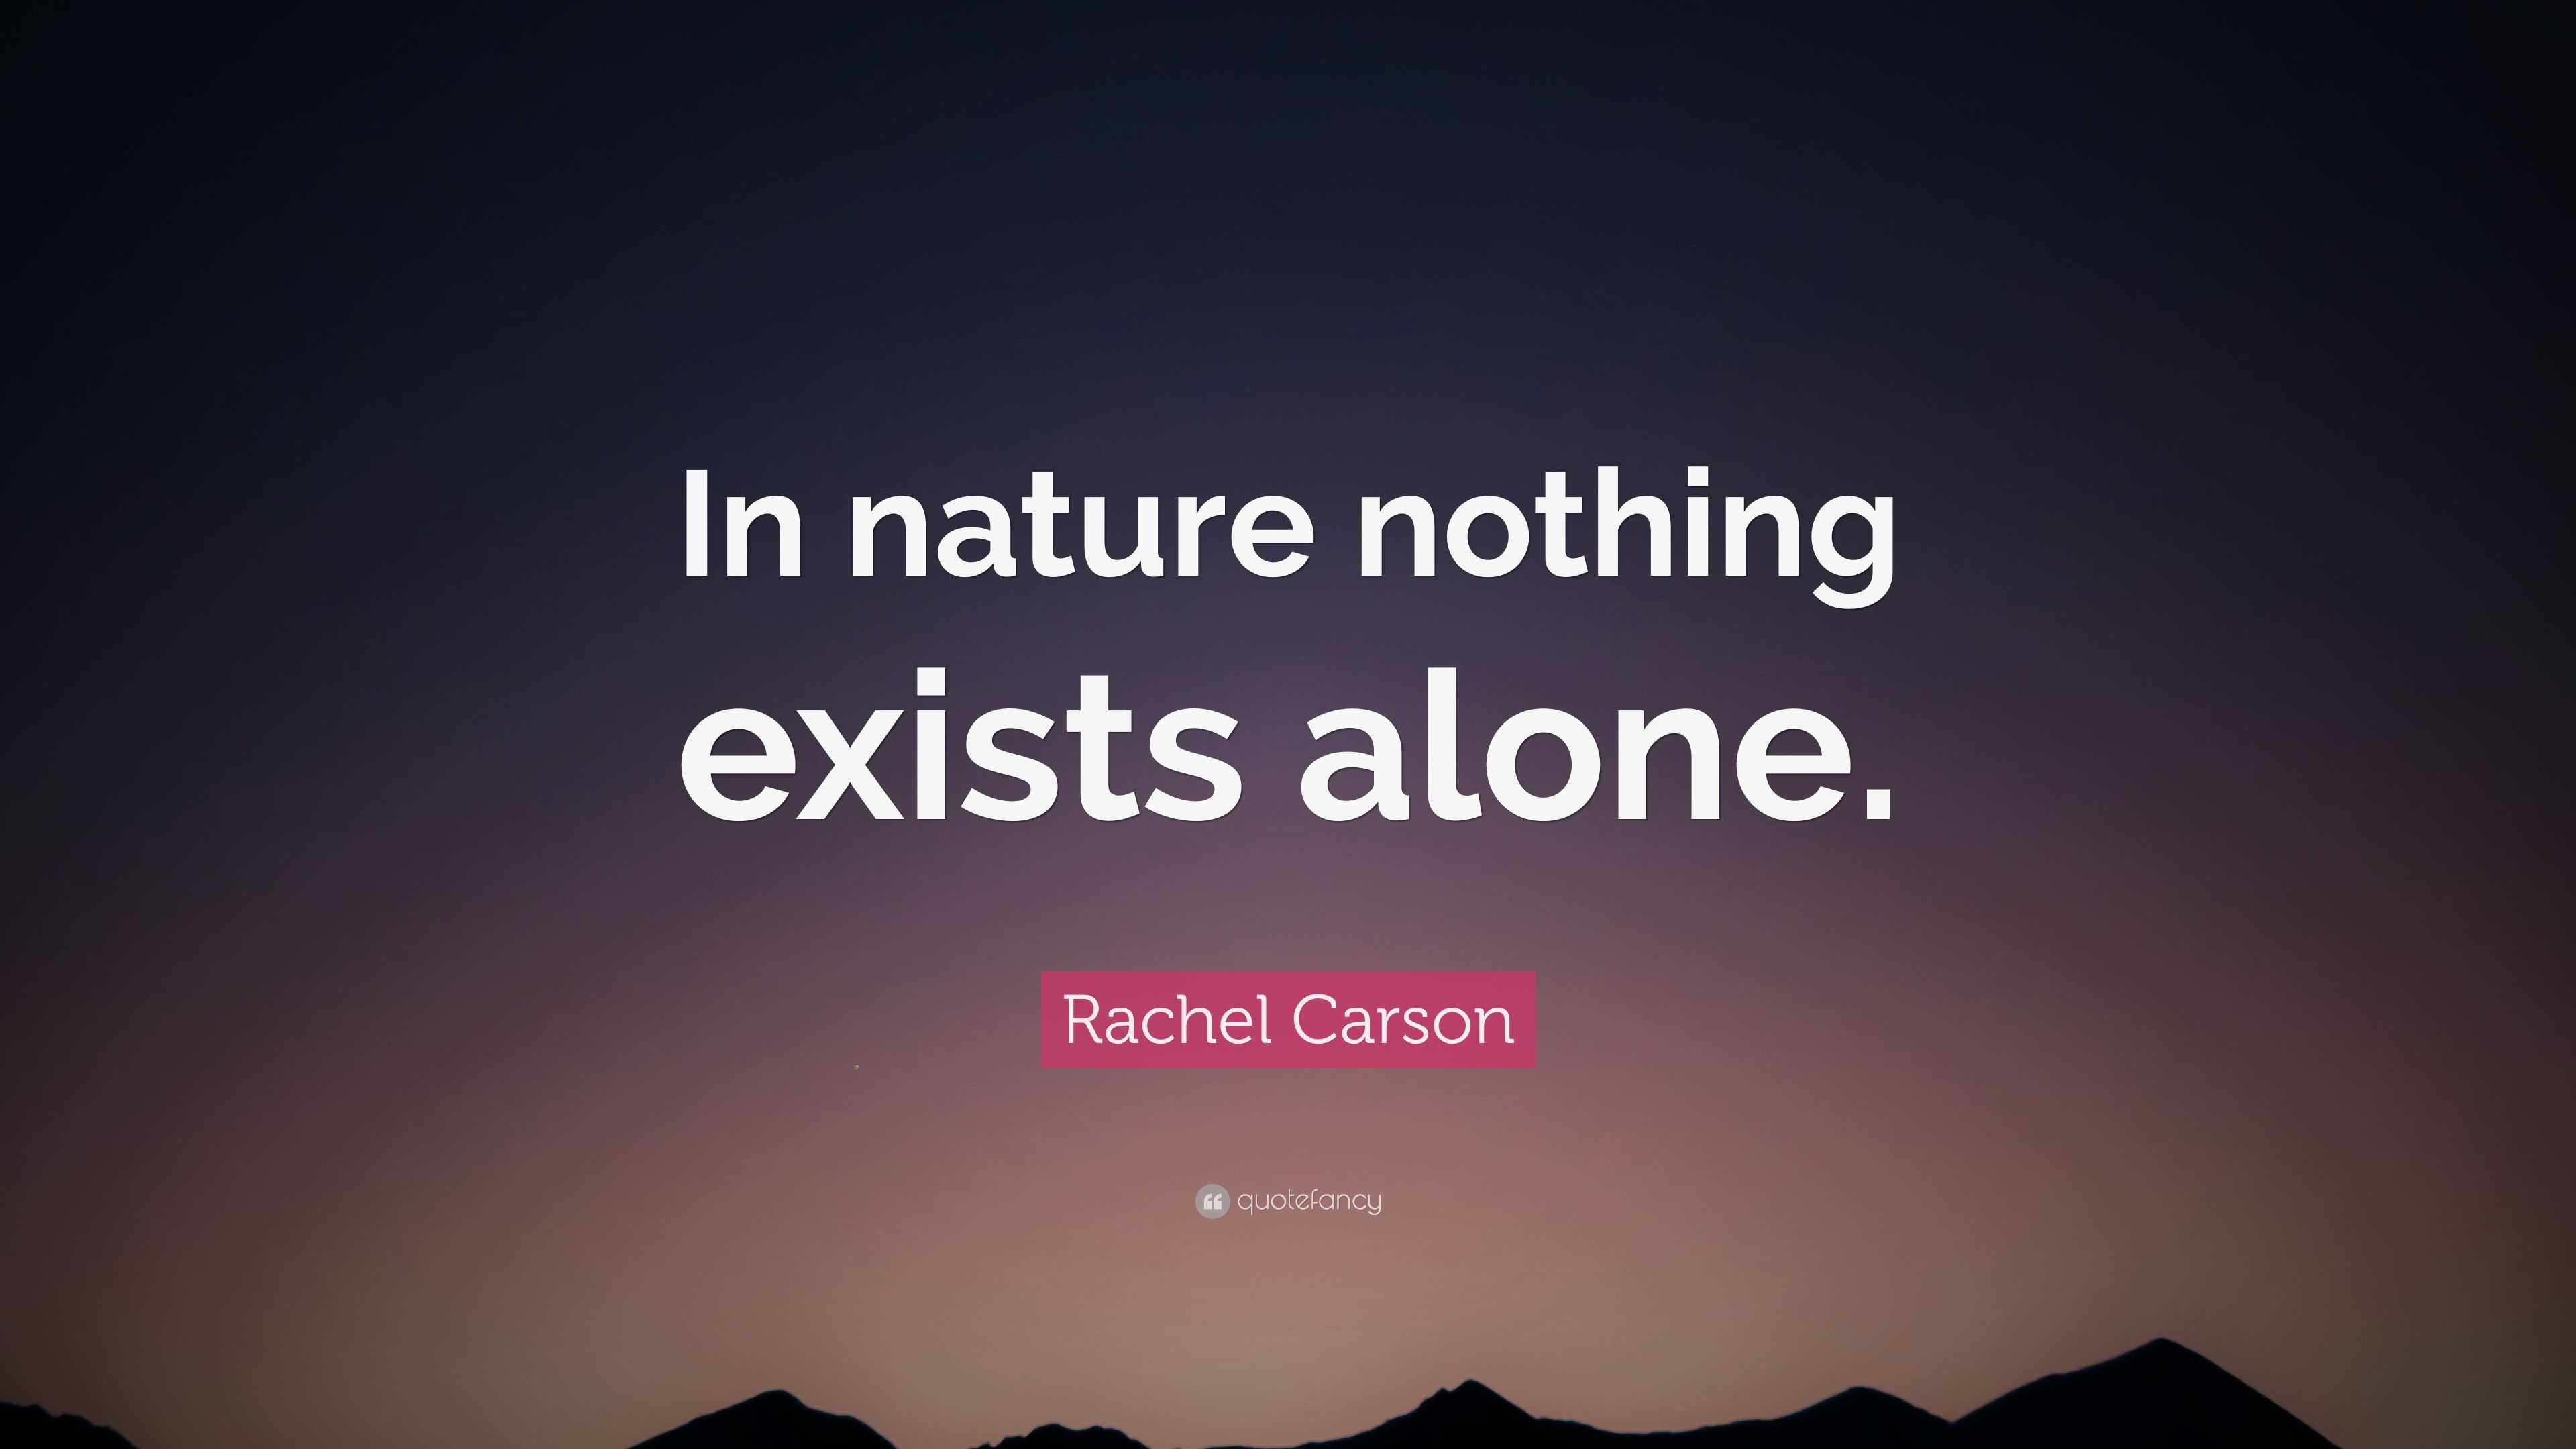 Rachel Carson Quote: “In nature nothing exists alone.”